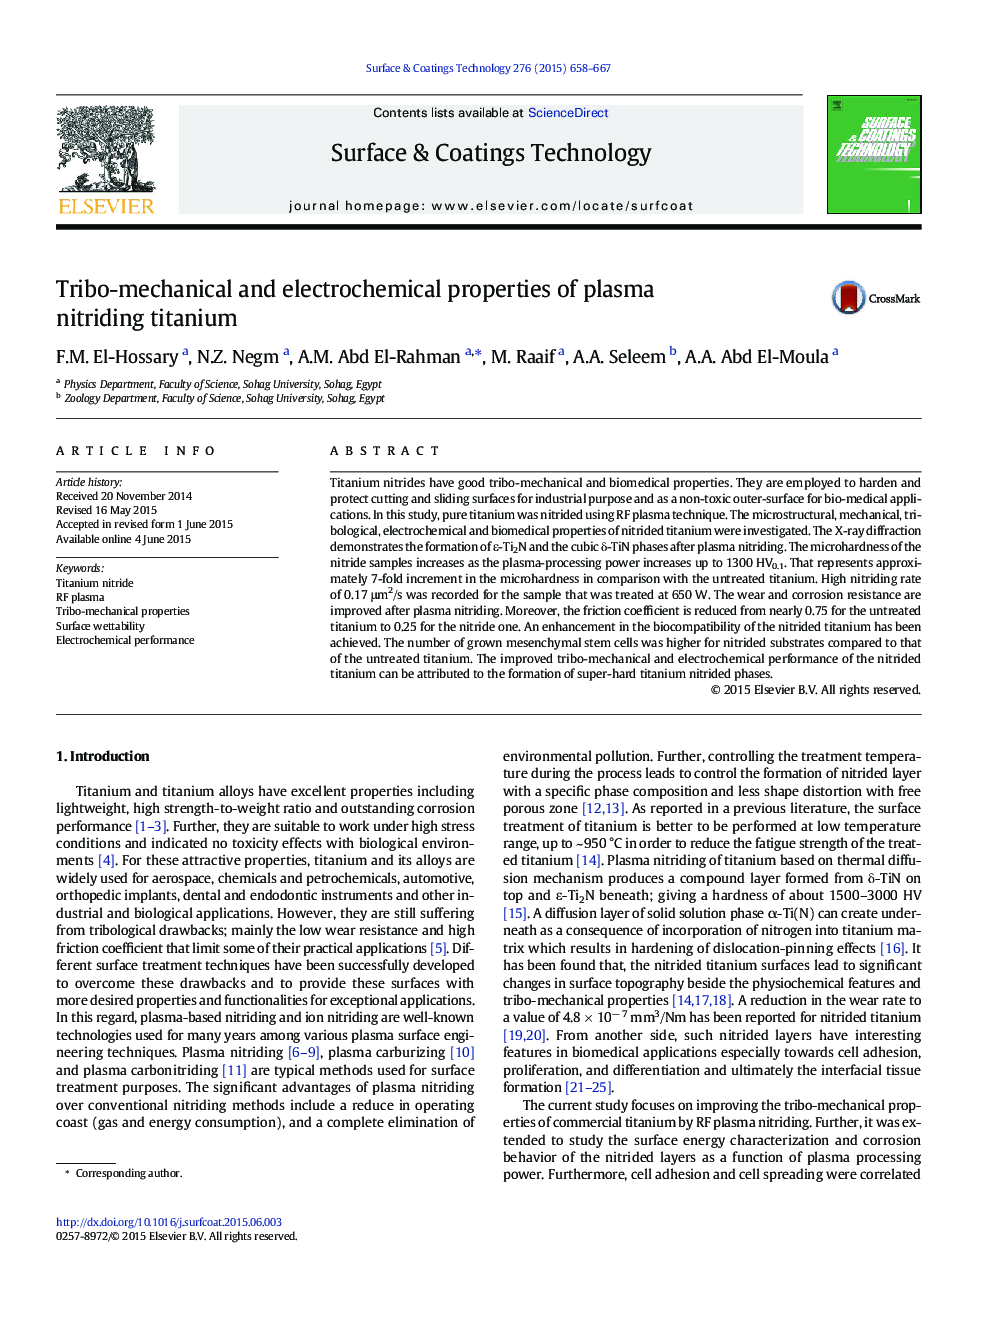 Tribo-mechanical and electrochemical properties of plasma nitriding titanium